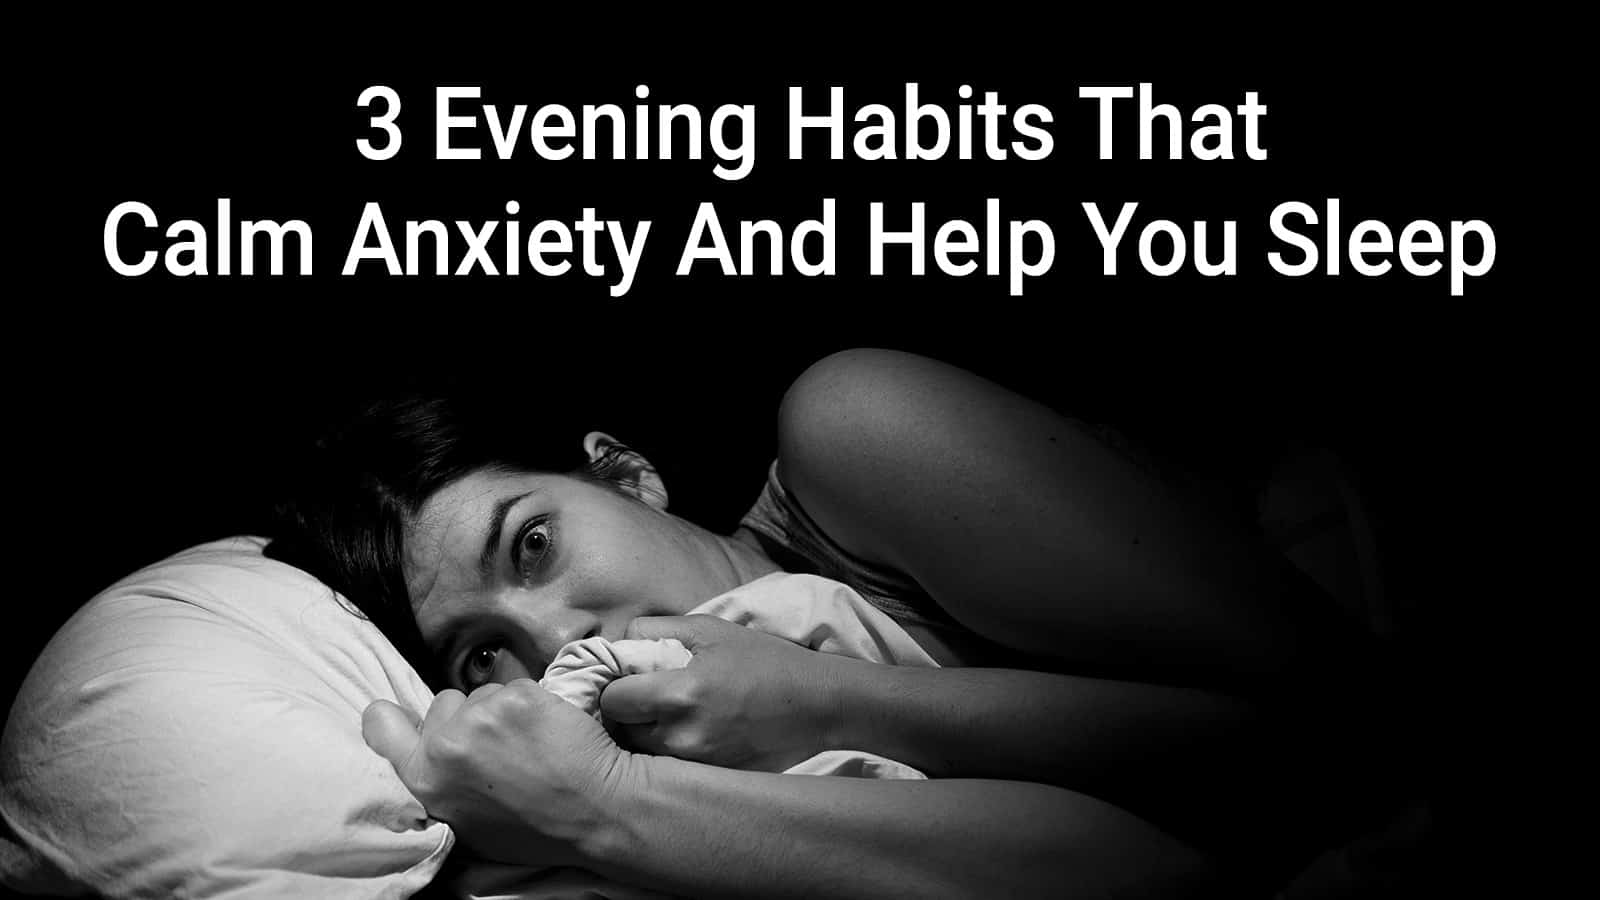 3 Evening Habits That Calm Anxiety And Help You Sleep